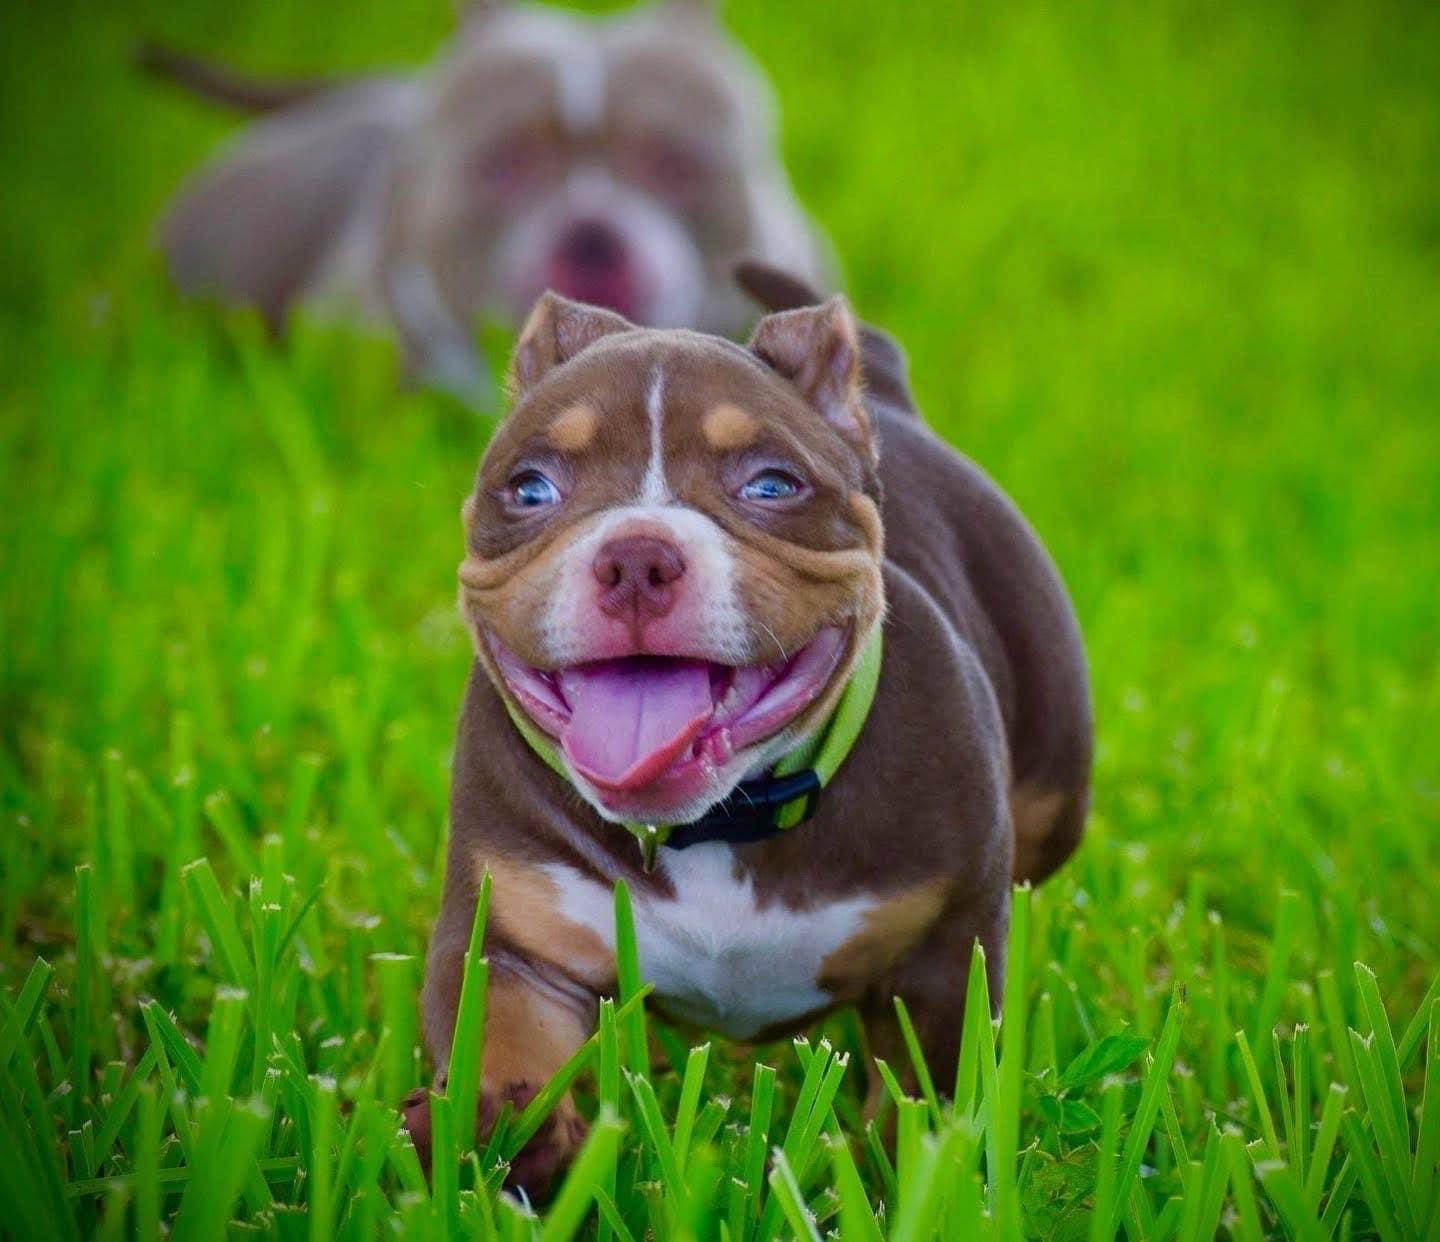 American Pocket Bully Lilac Tri Puppies in Birmingham B21 on Freeads  Classifieds - American Bully classifieds